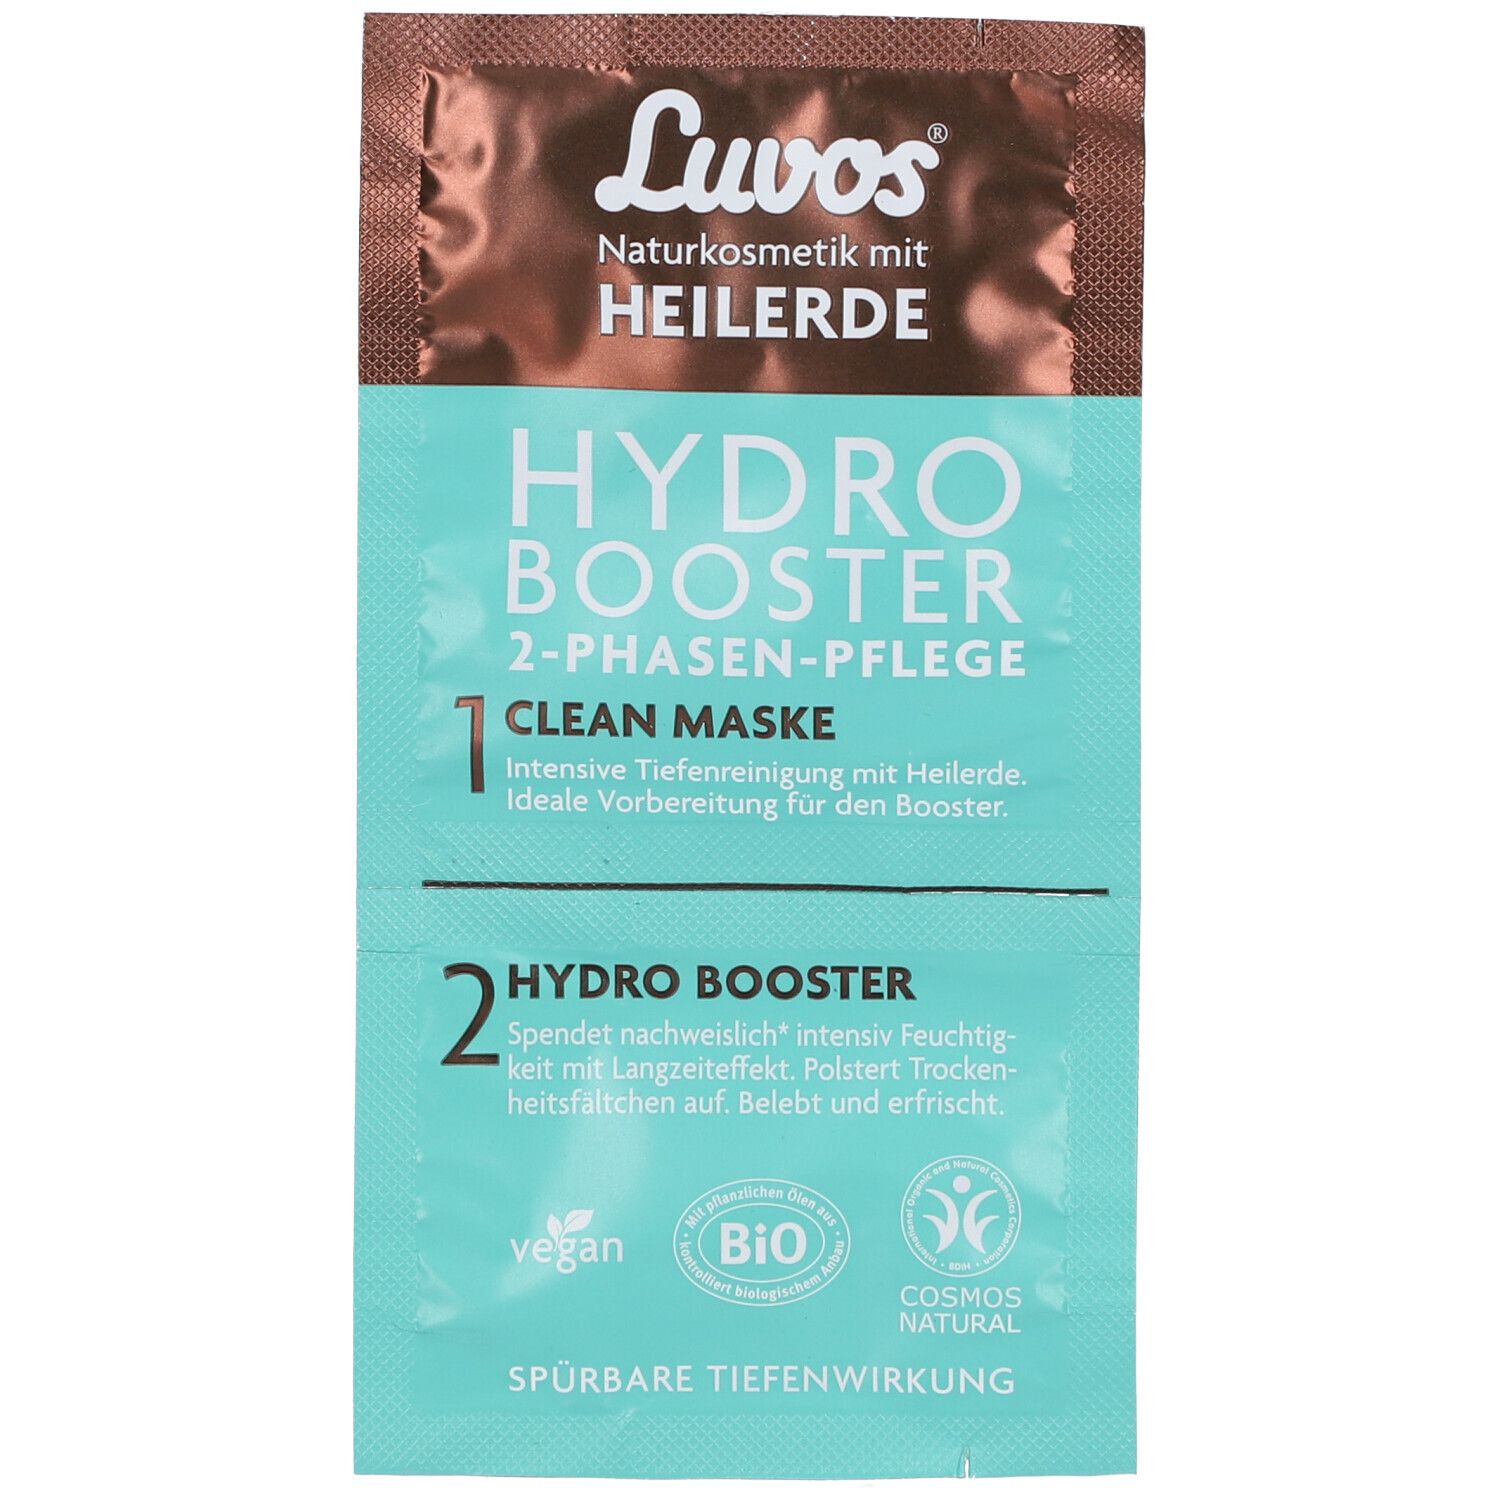 Terre médicinale Luvos Hydro Booster avec masque Clean, soin en 2 phases